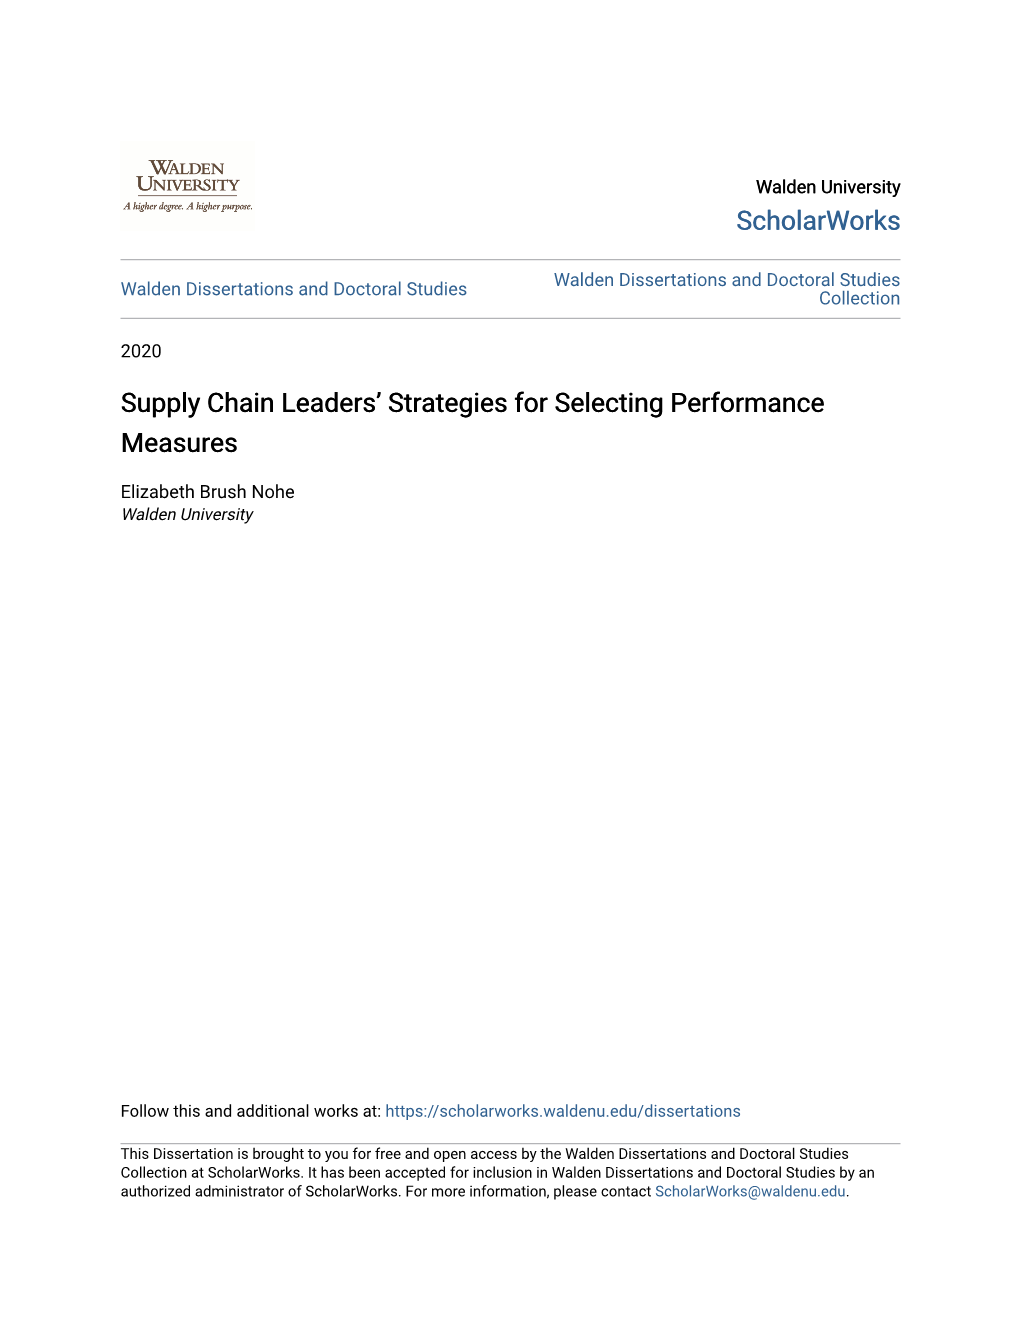 Supply Chain Leaders' Strategies for Selecting Performance Measures